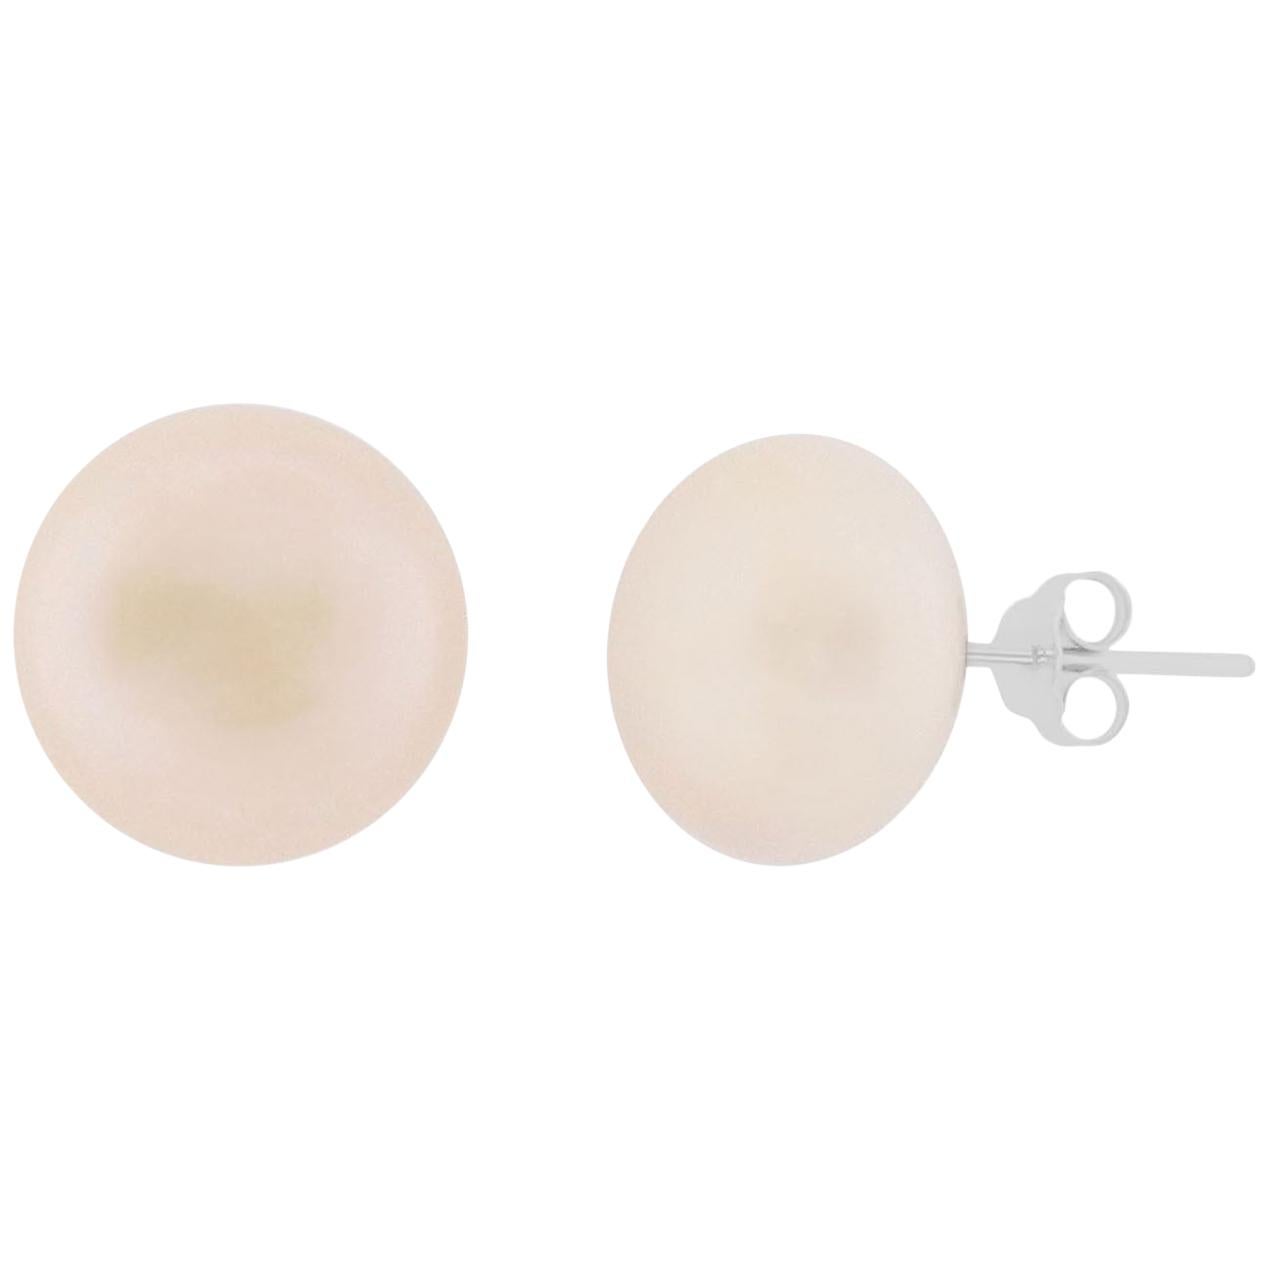 12mm White Round Freshwater Pearl Stud Earrings on Silver